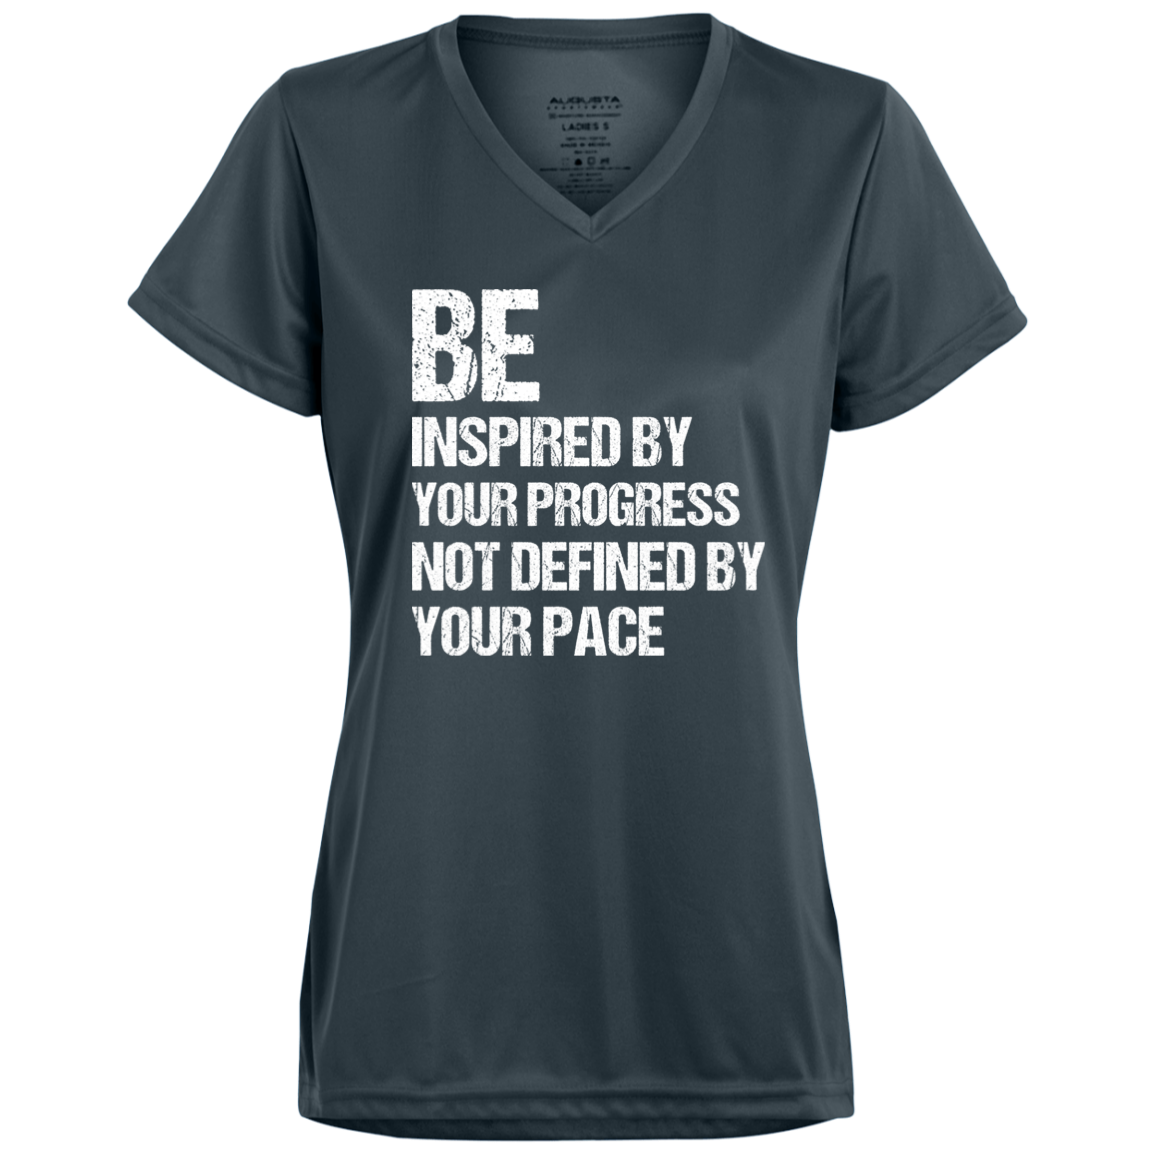 Women's Inspirational Top Be inspired by your progress, not defined by your pace